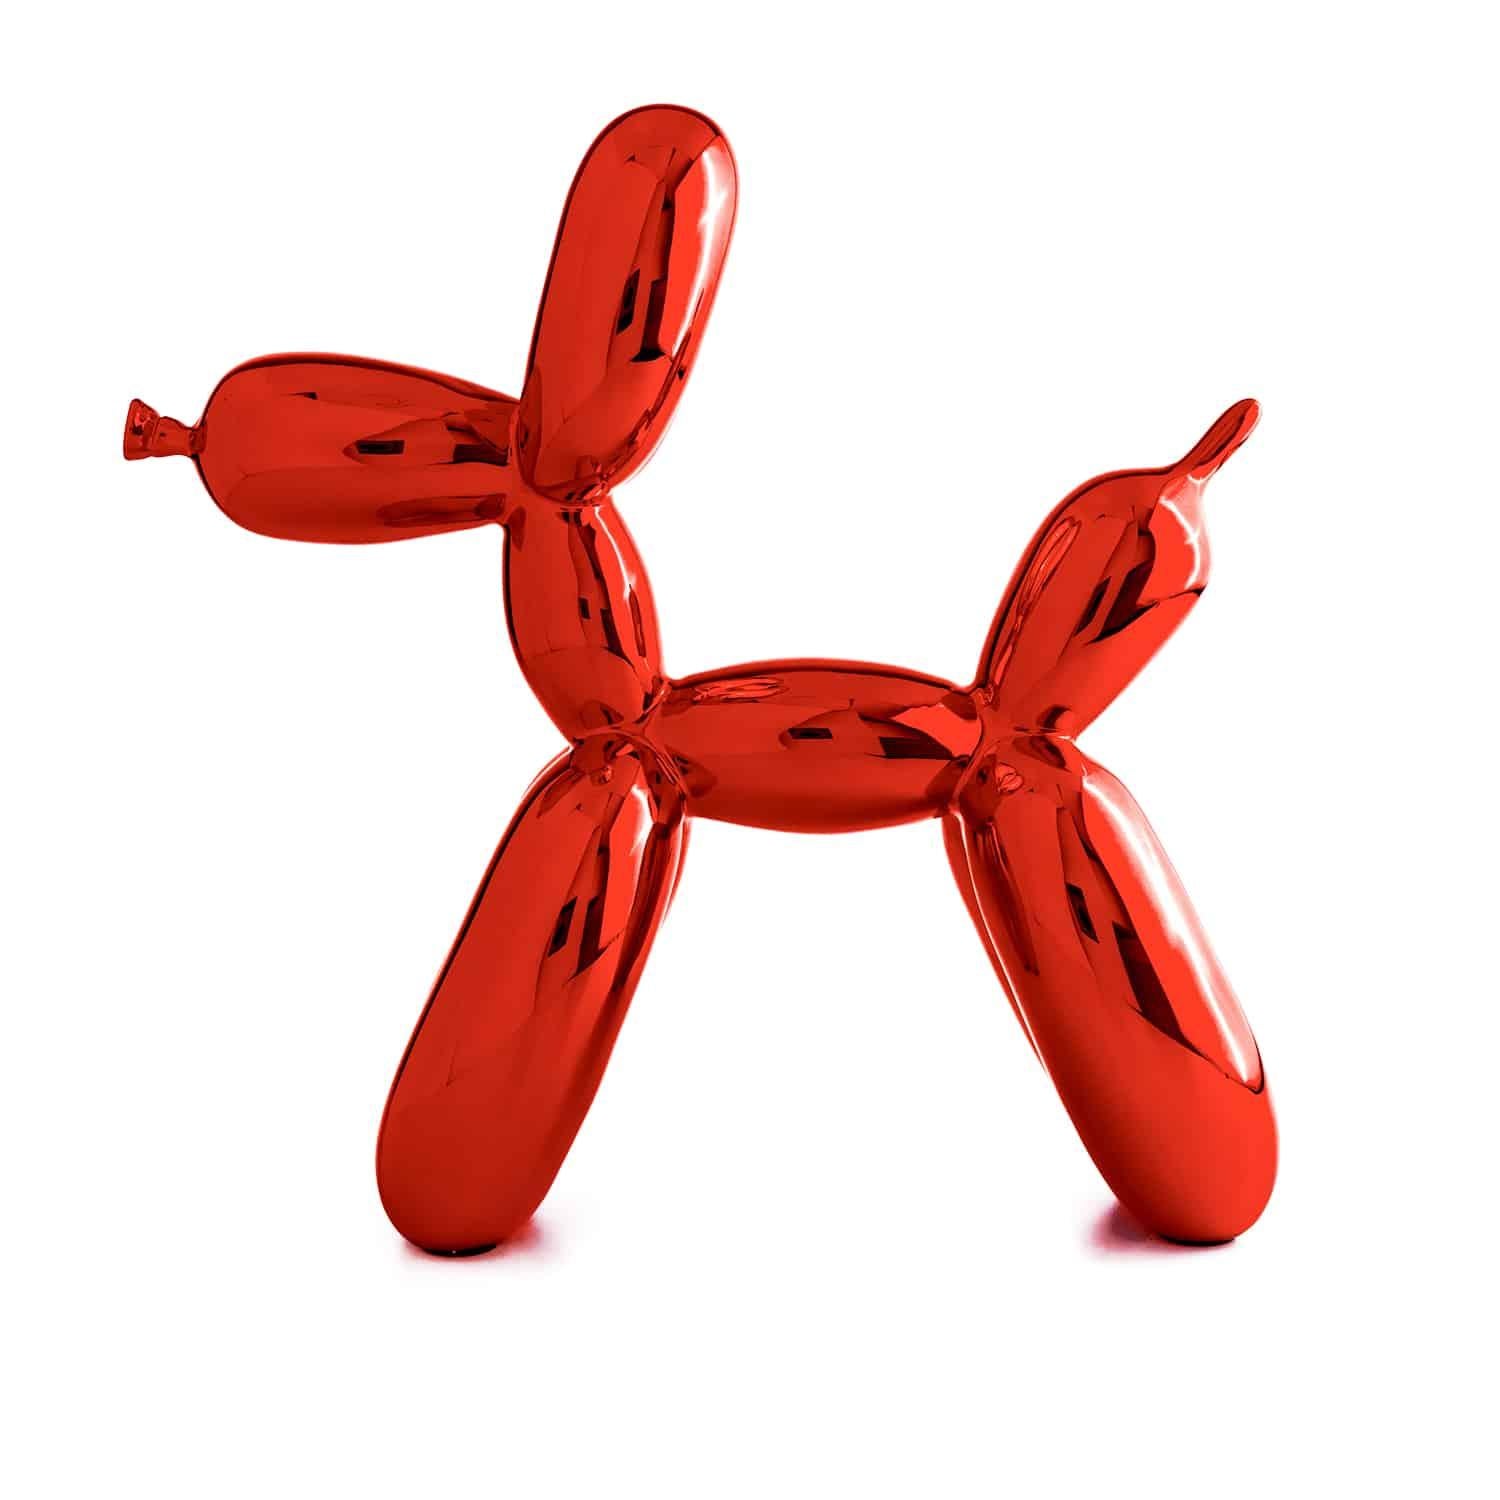 Balloon Dog (After) -  Red - Sculpture by After Jeff Koons